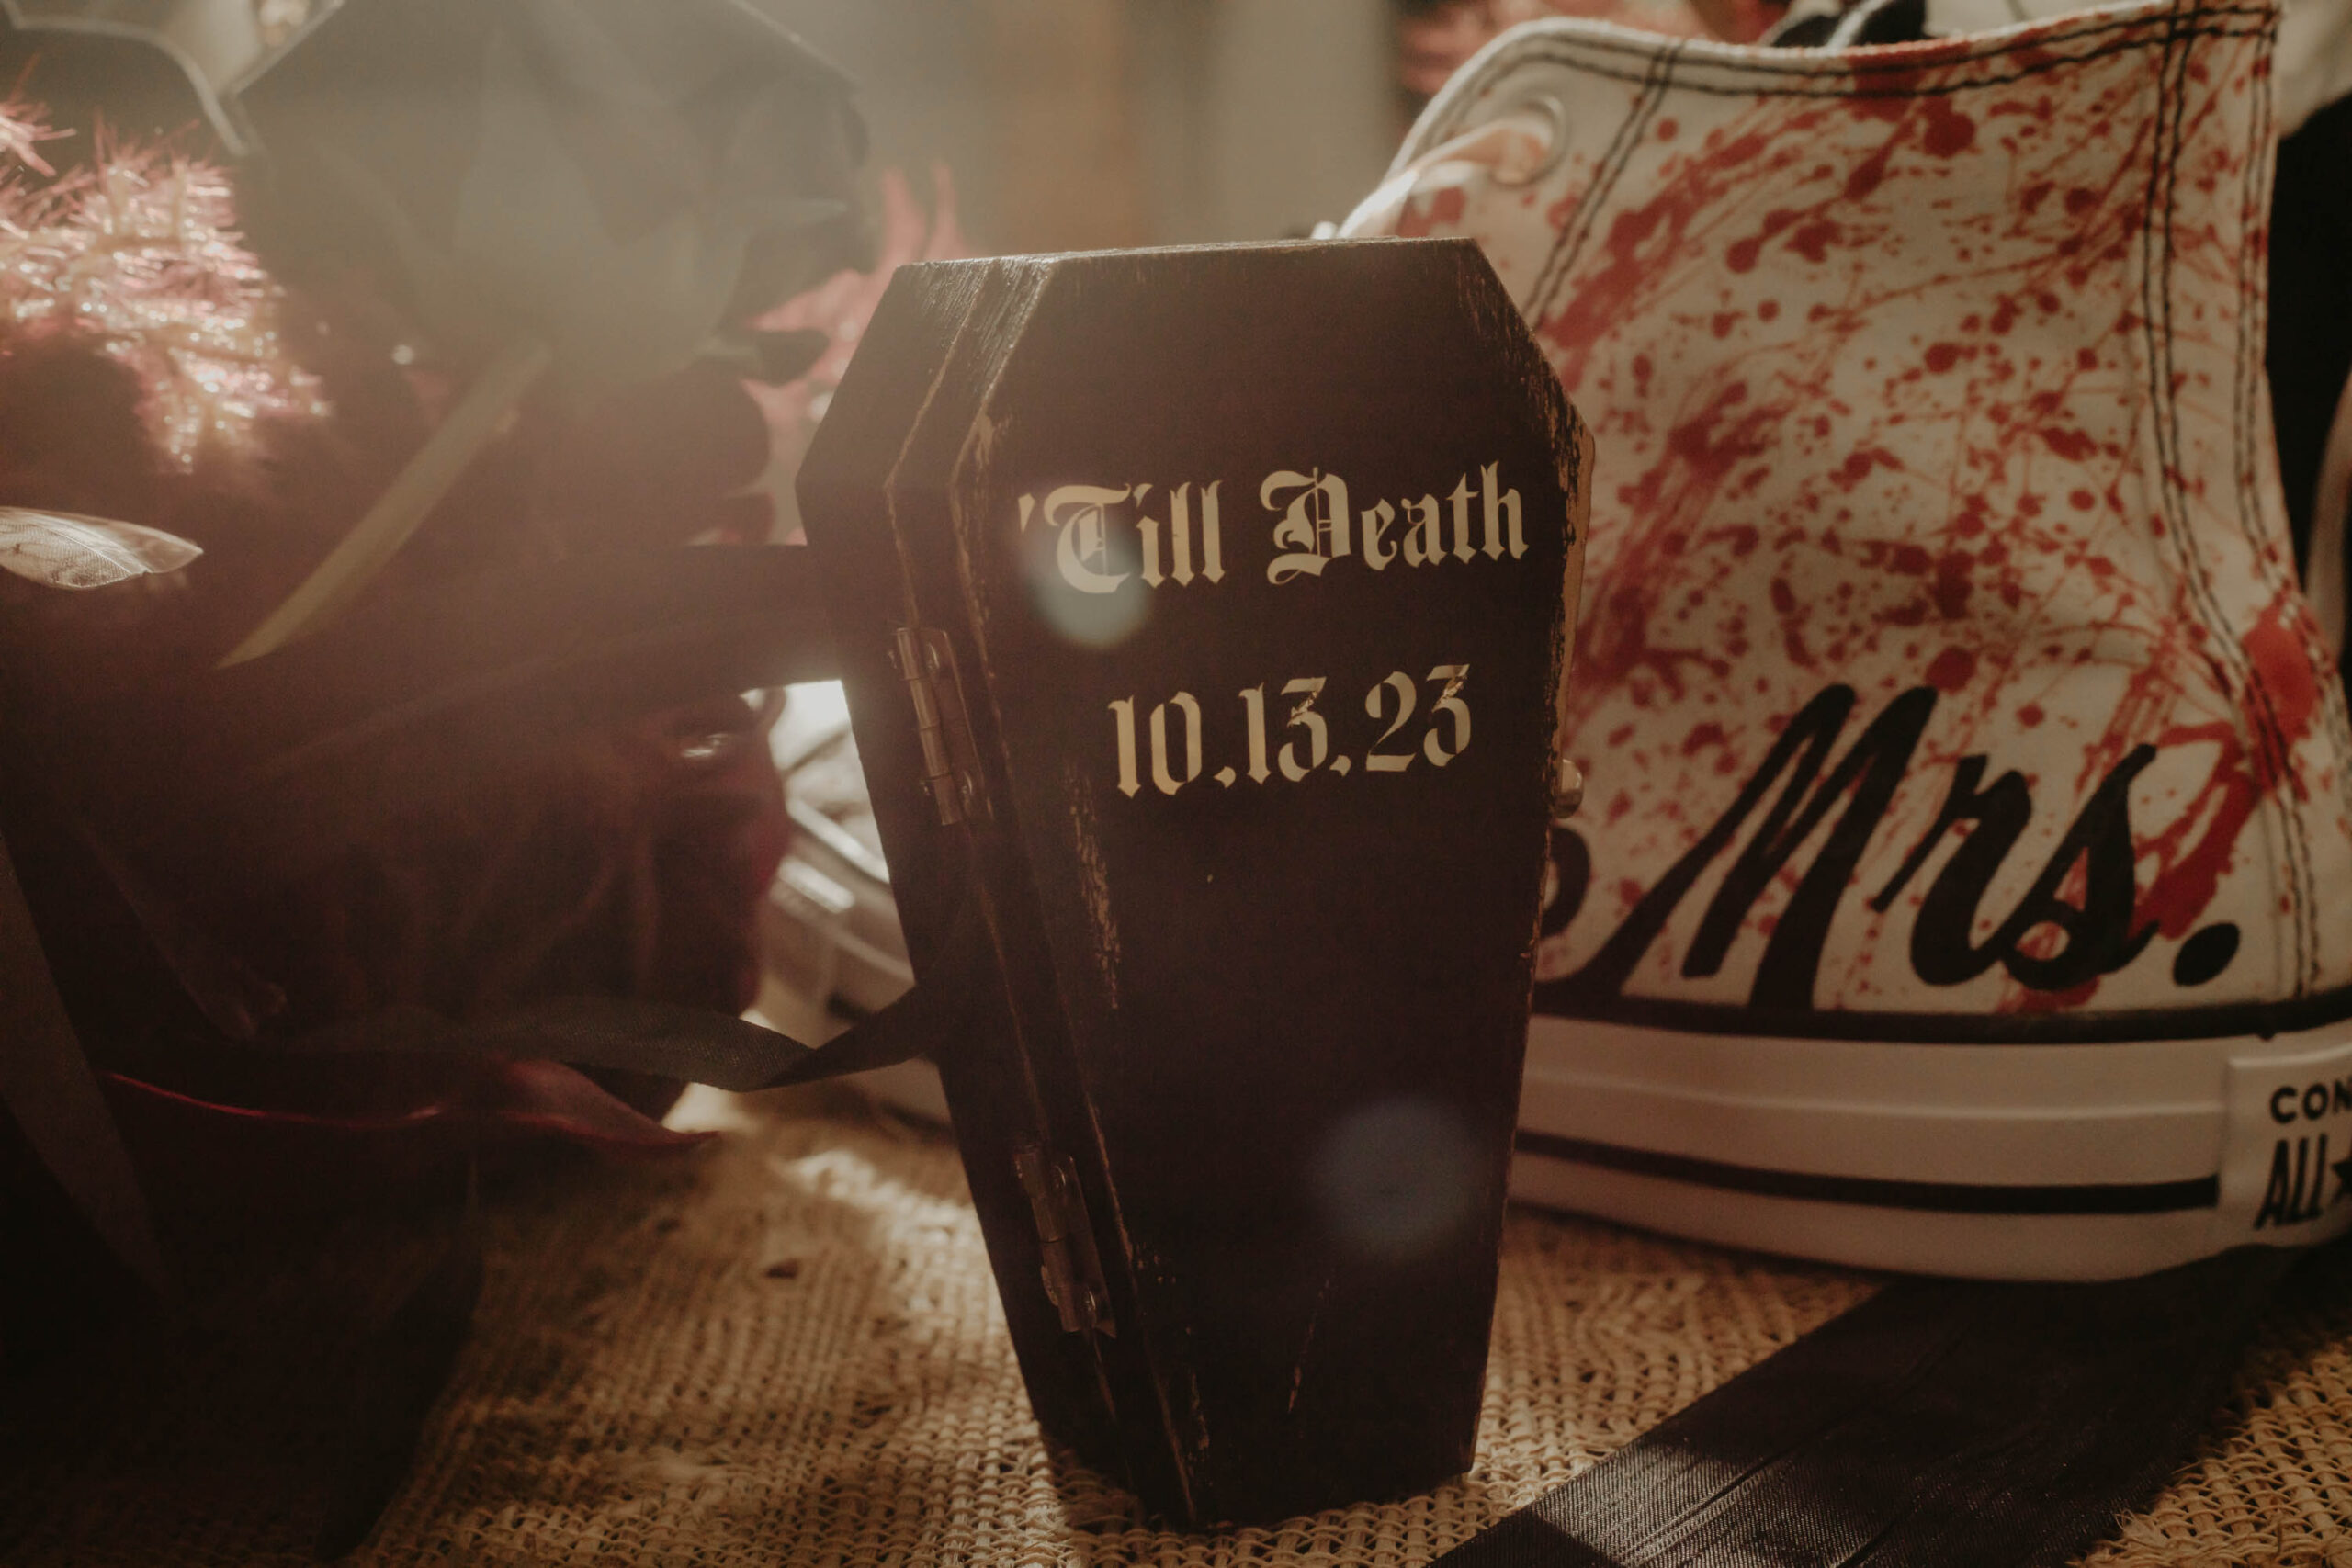 This image is of wedding details. The ring box is a coffin for a Halloween themed wedding.